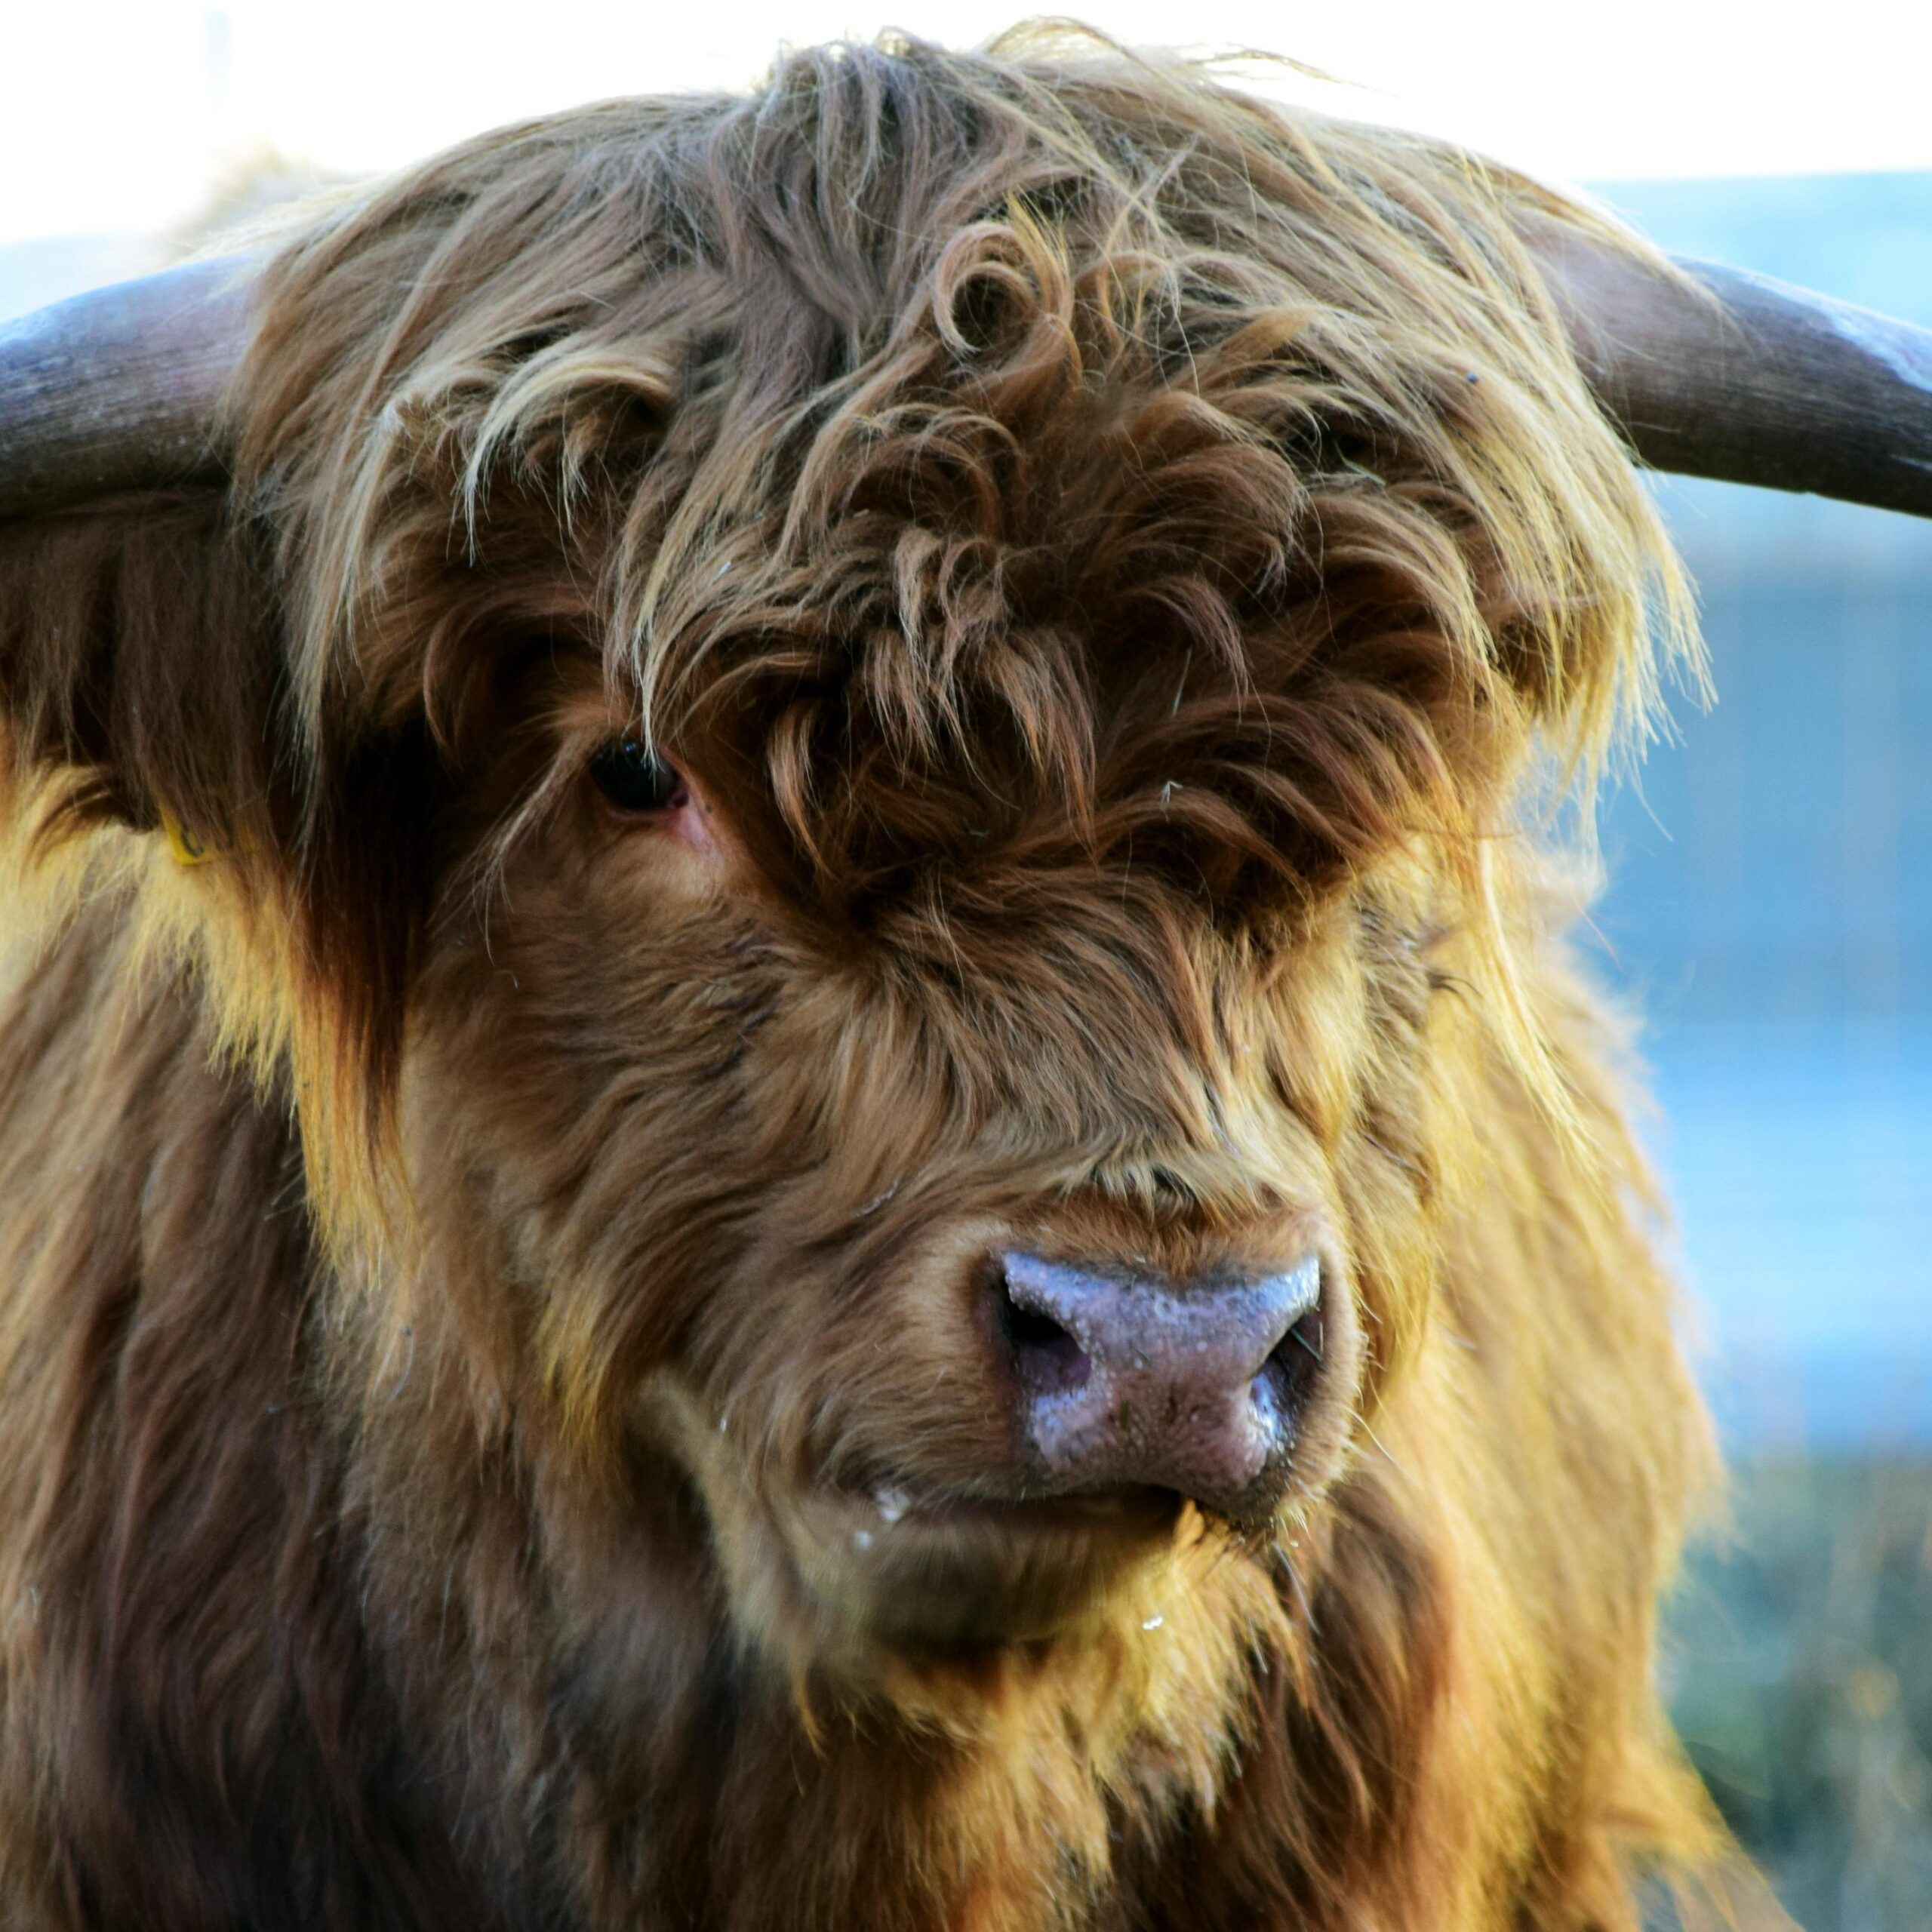 Download wallpapers highland, cow, horns ipad air